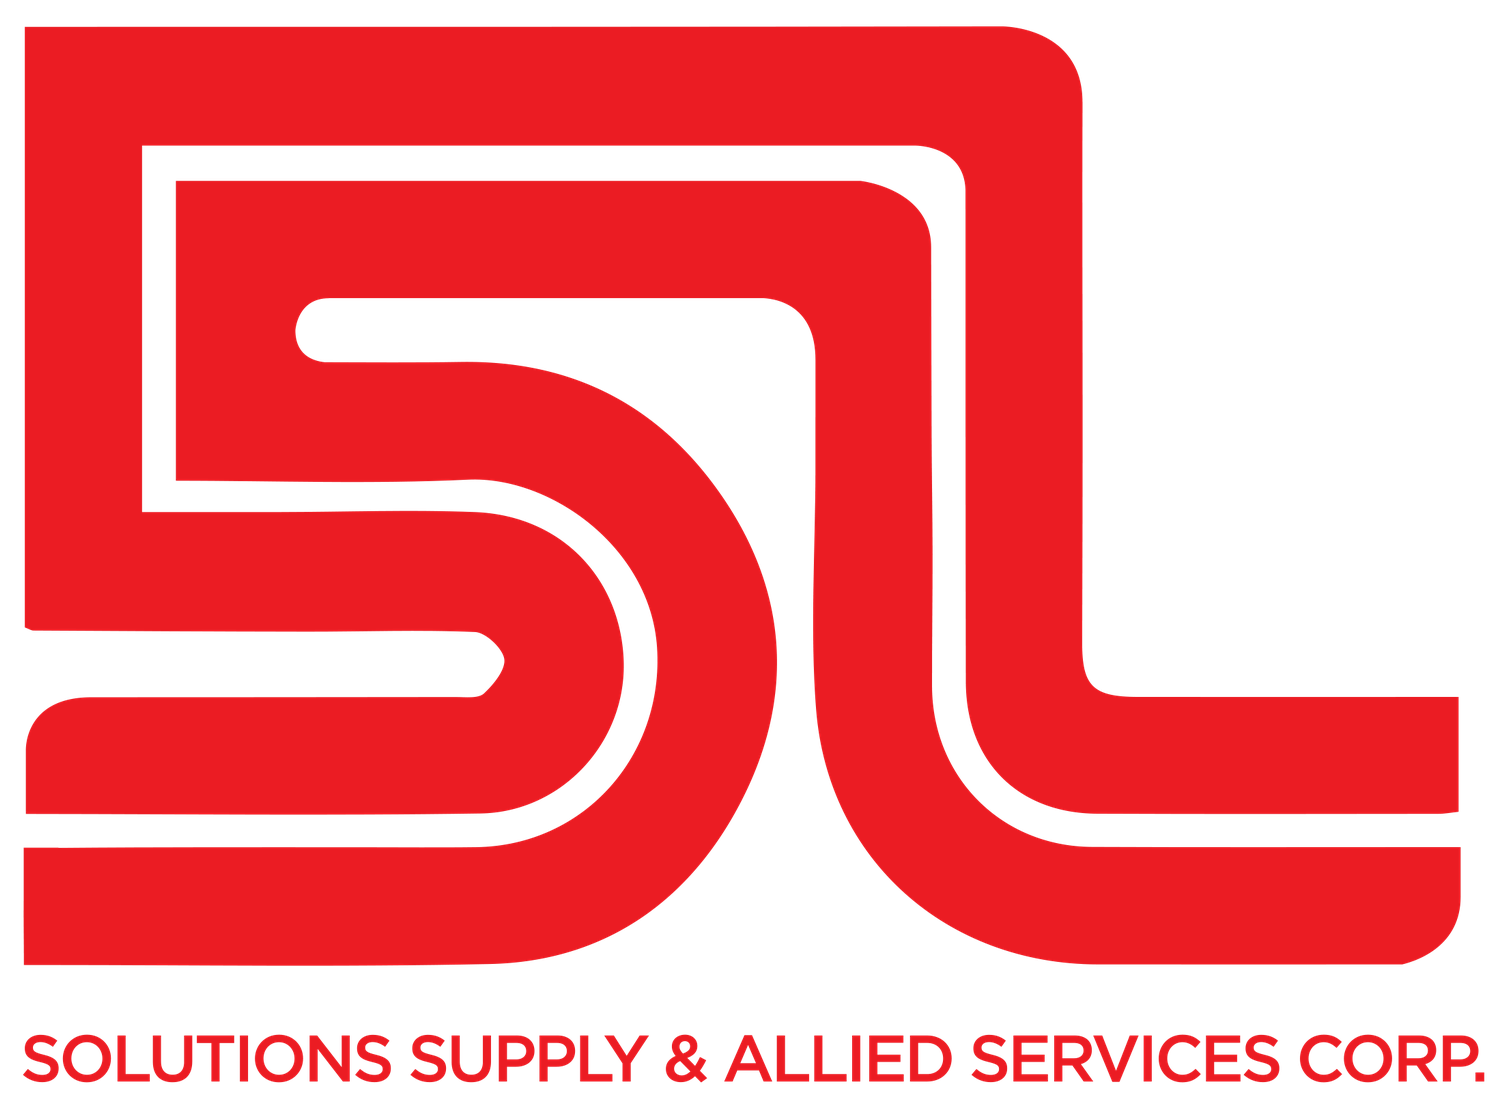 5L Solutions supply & Allied services corp.